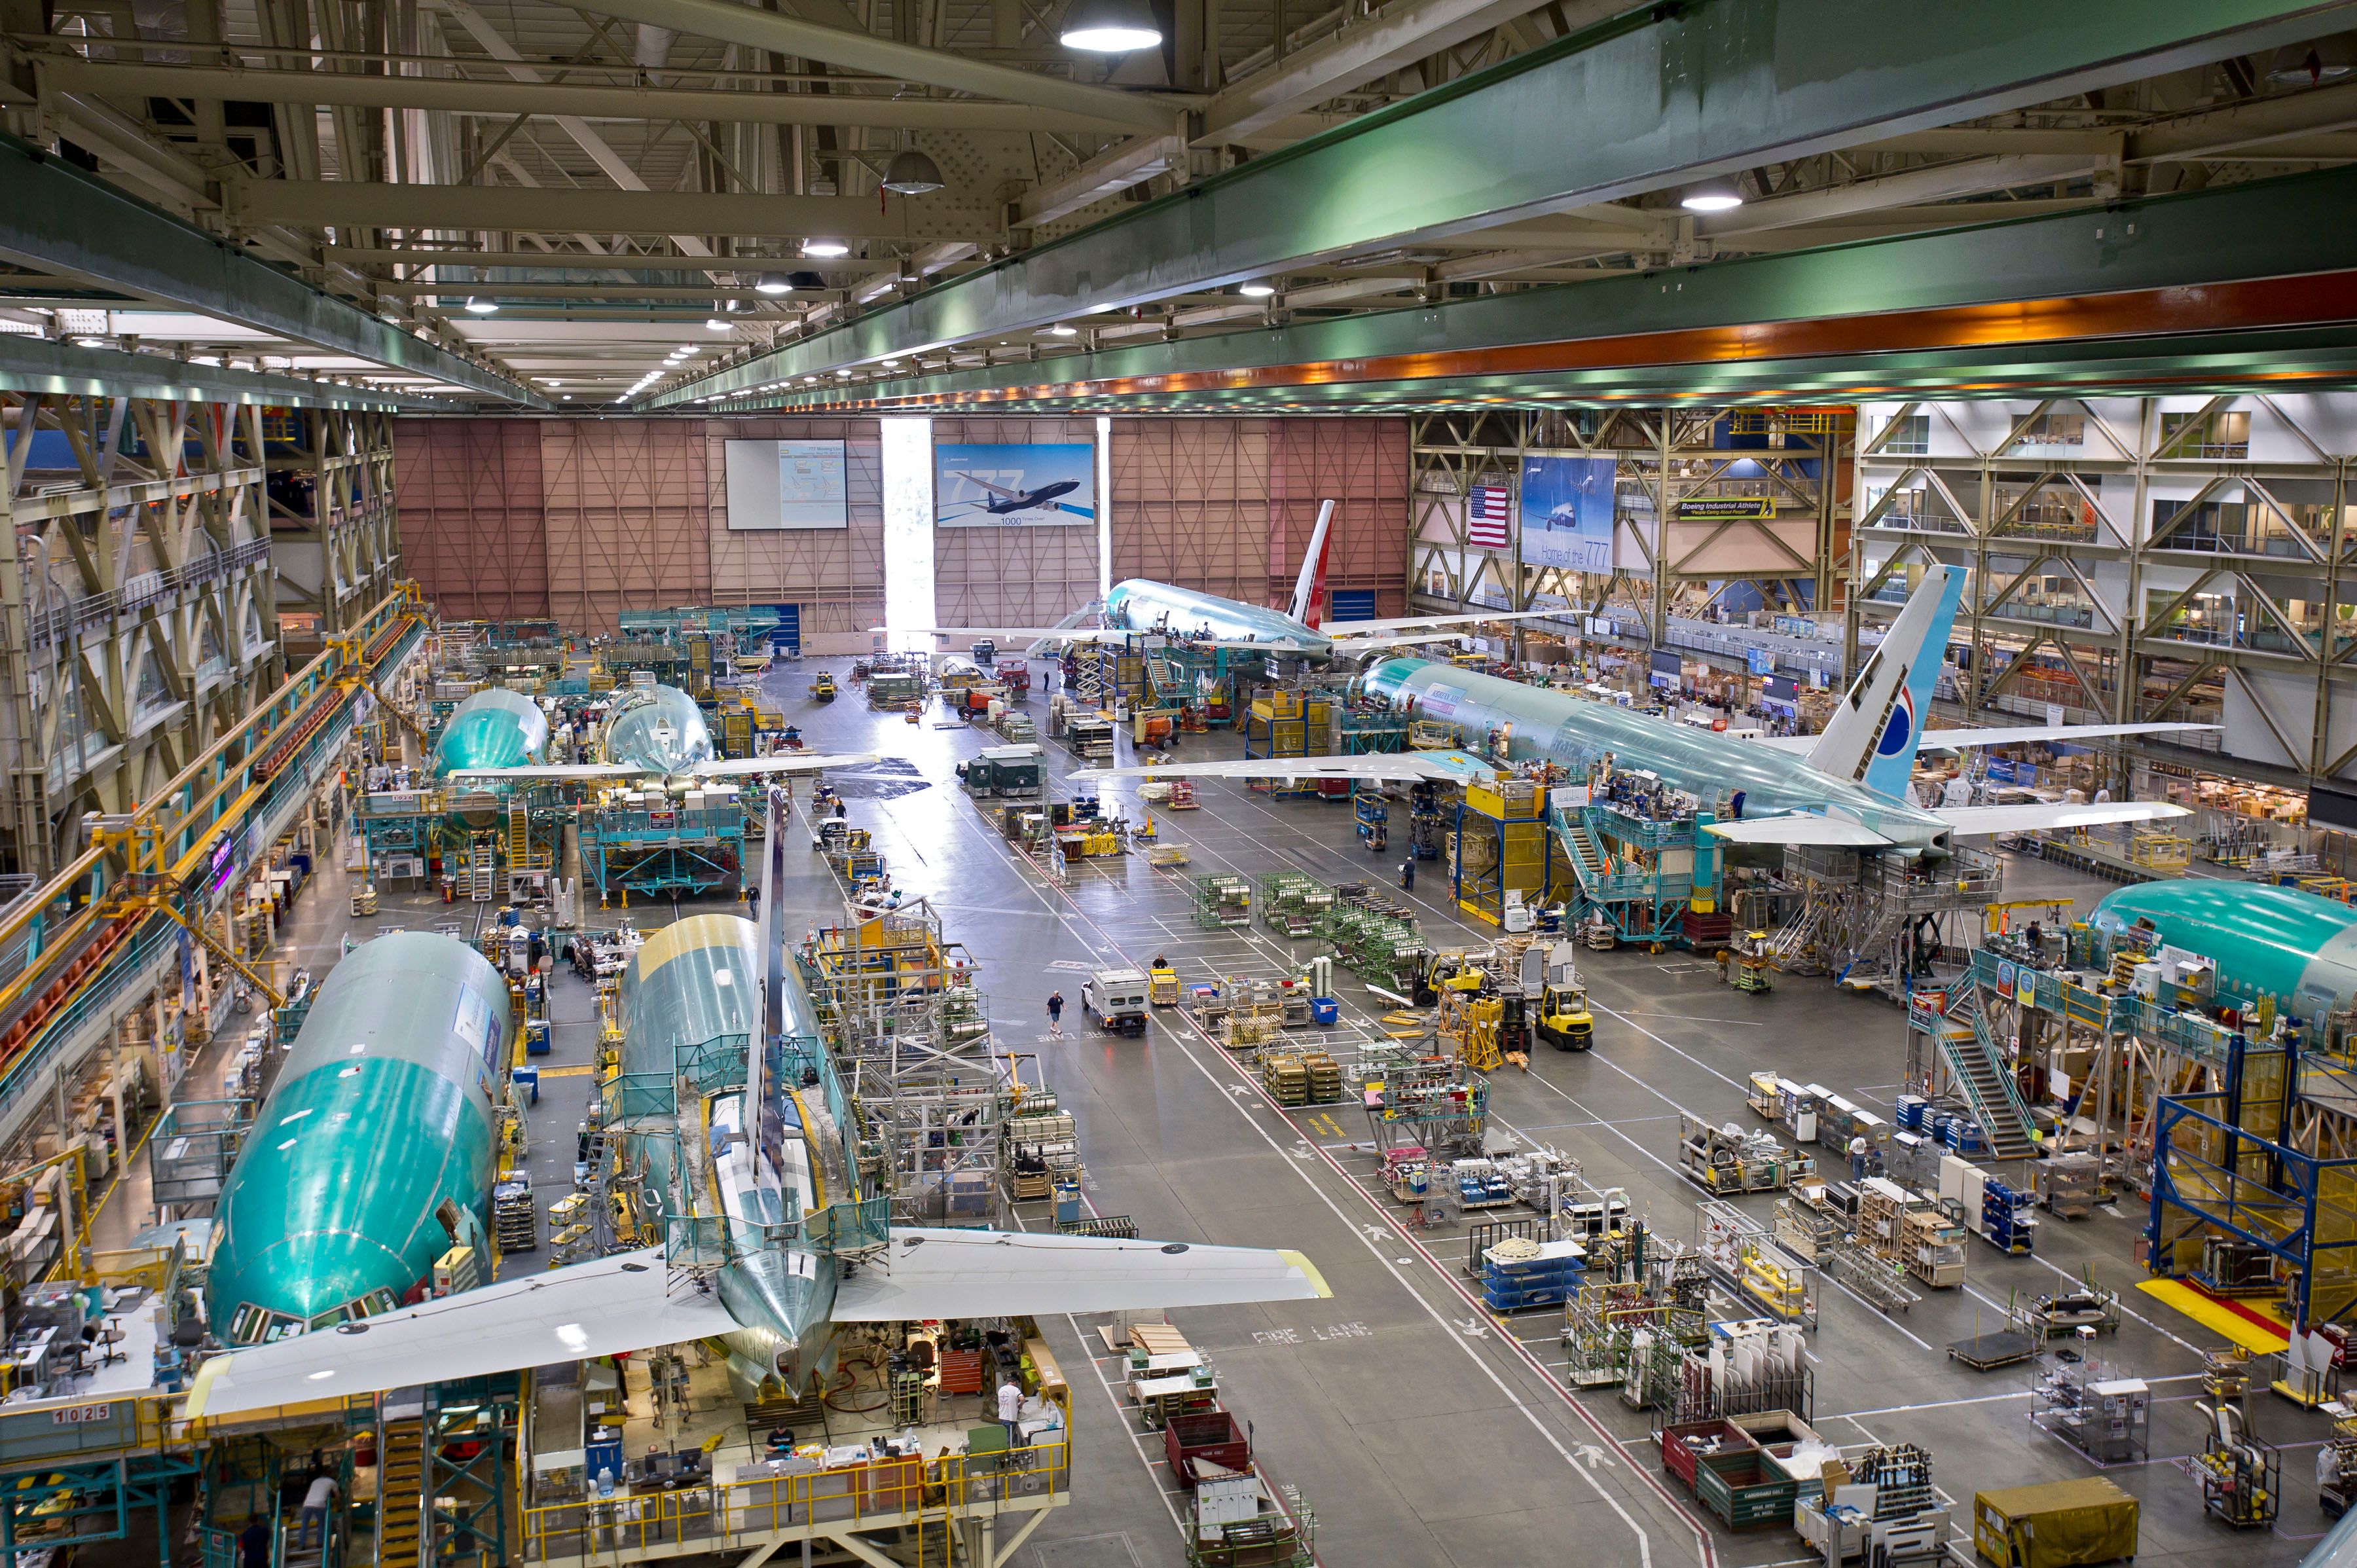 Several Boeing aircraft being produced.